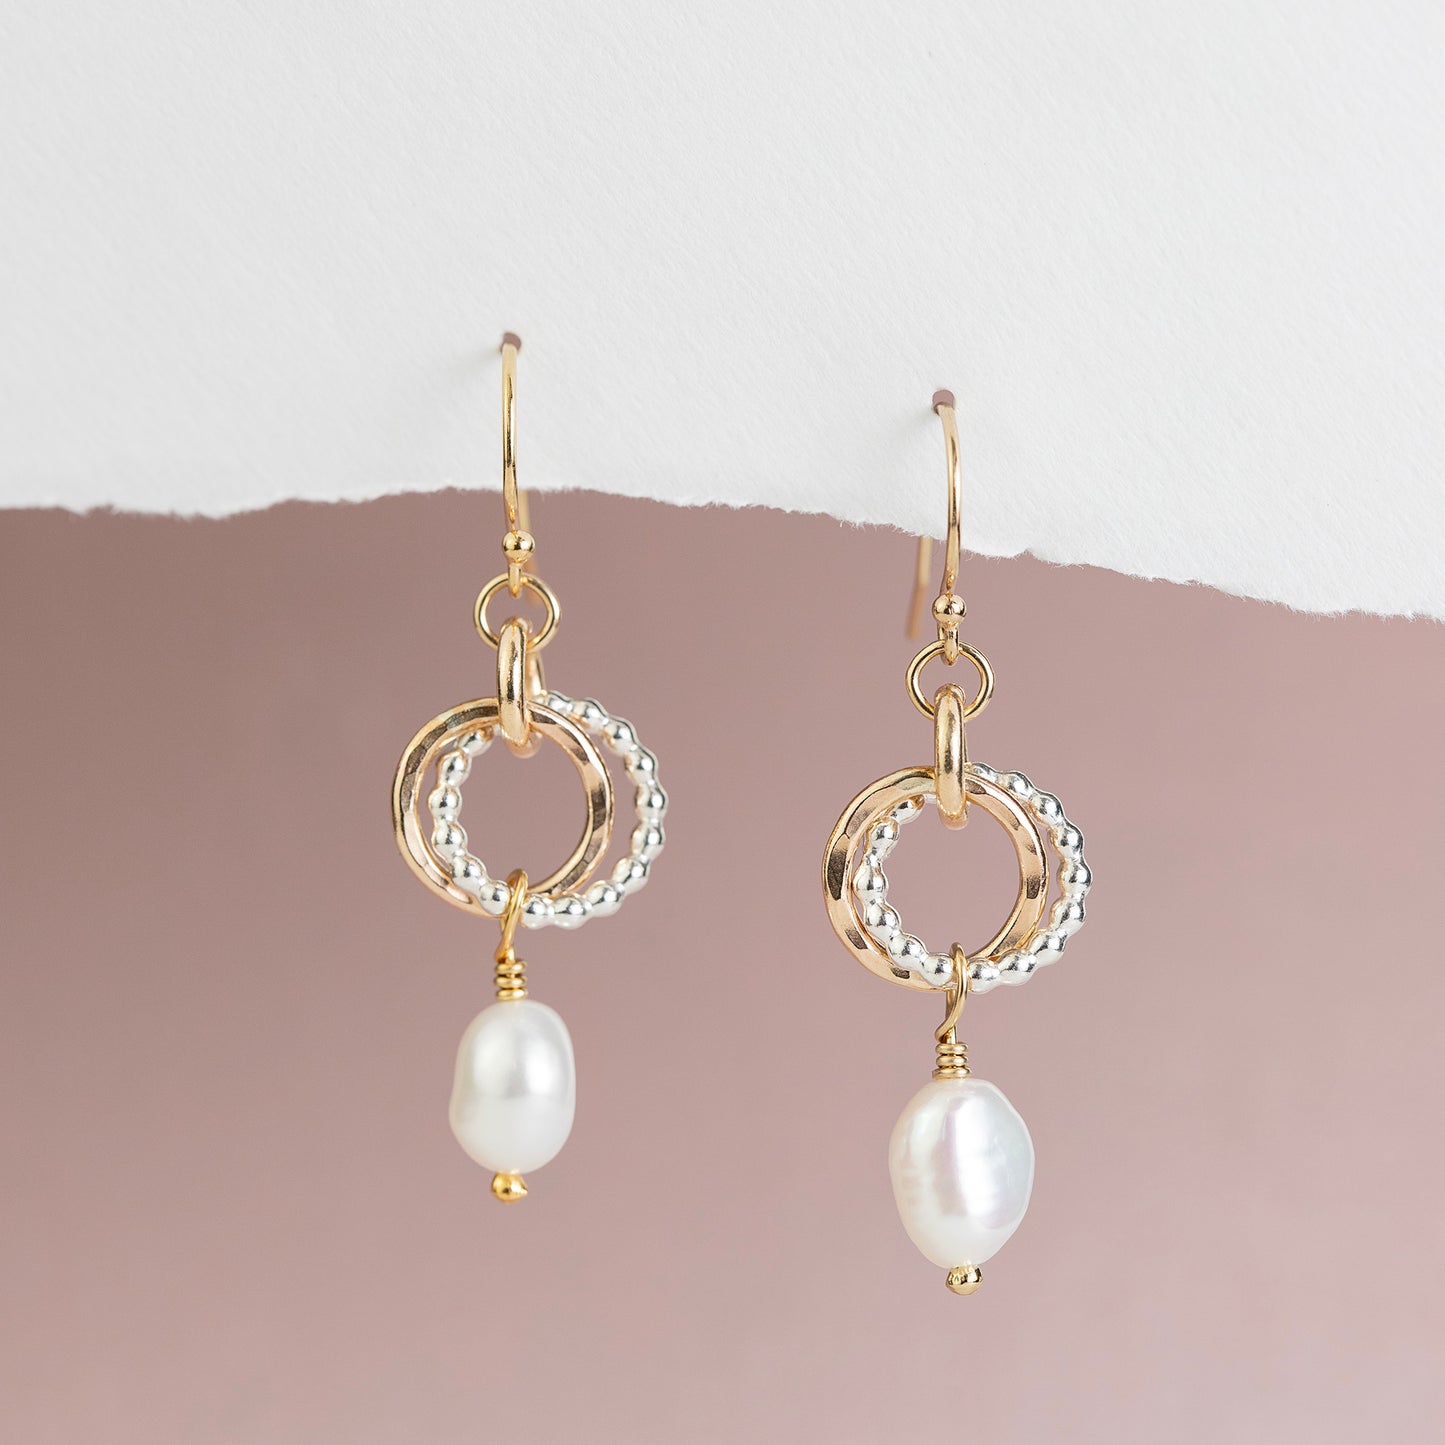 Sister & Bridesmaid Gift - Love Knot Pearl Earrings - Silver & Gold